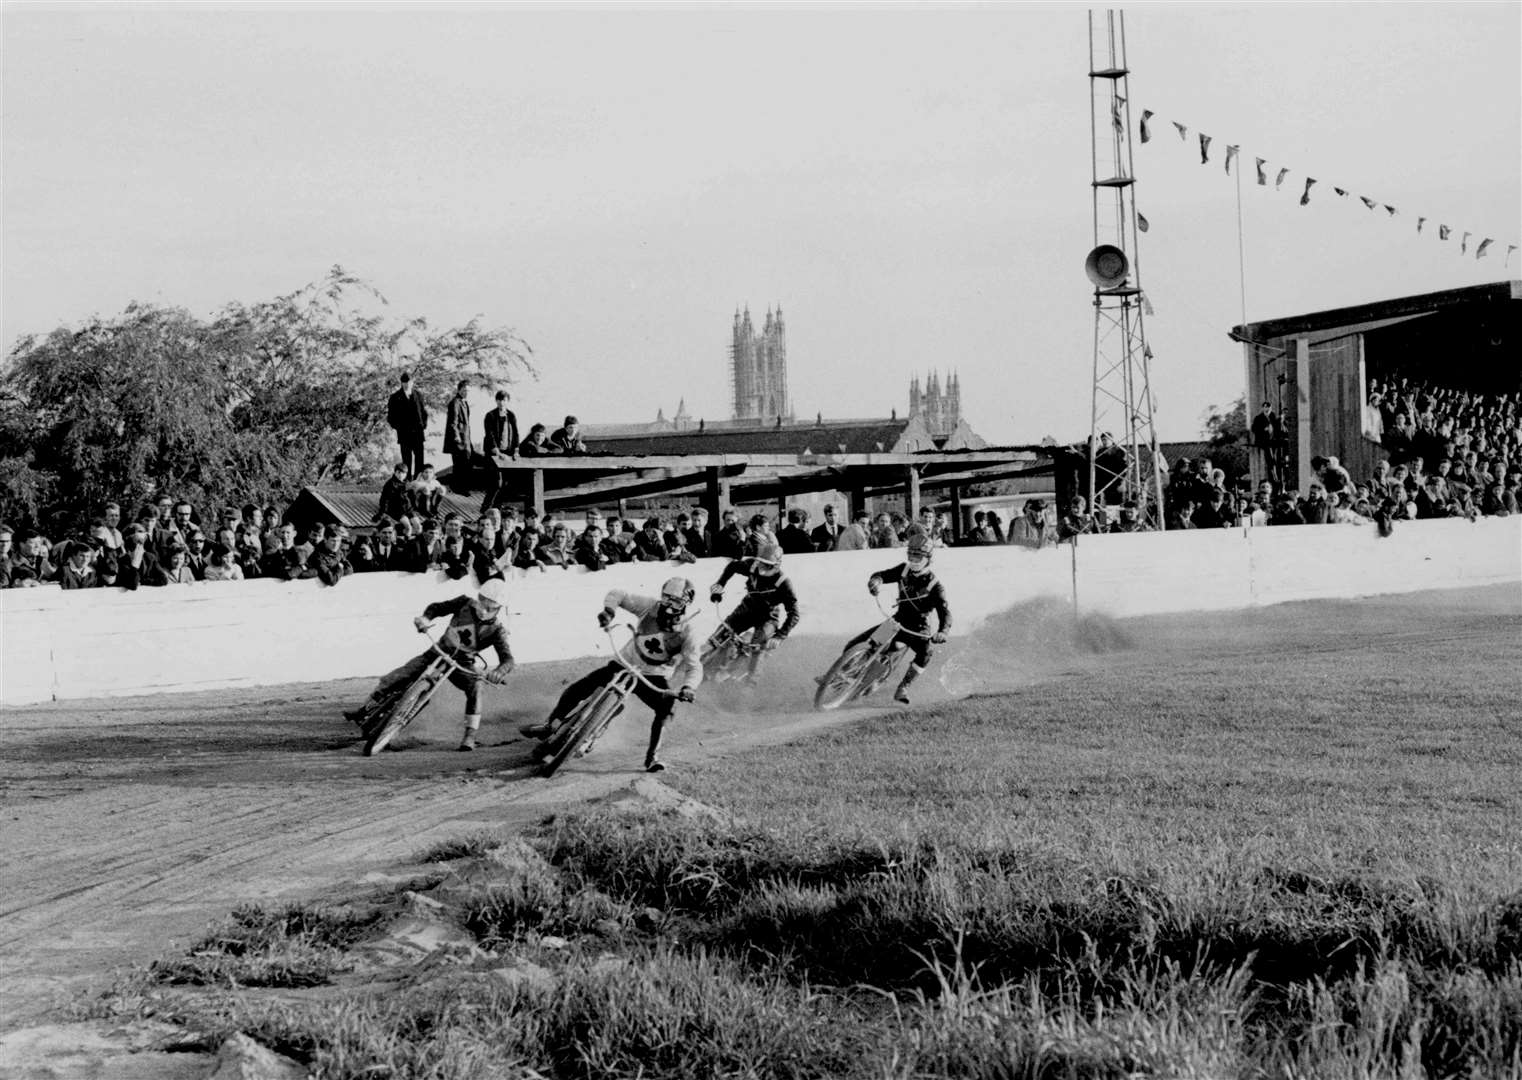 A crowd of 7,000 people, then the biggest ever at Kingsmead stadium, turned out to see speedway come to Canterbury in May 1968